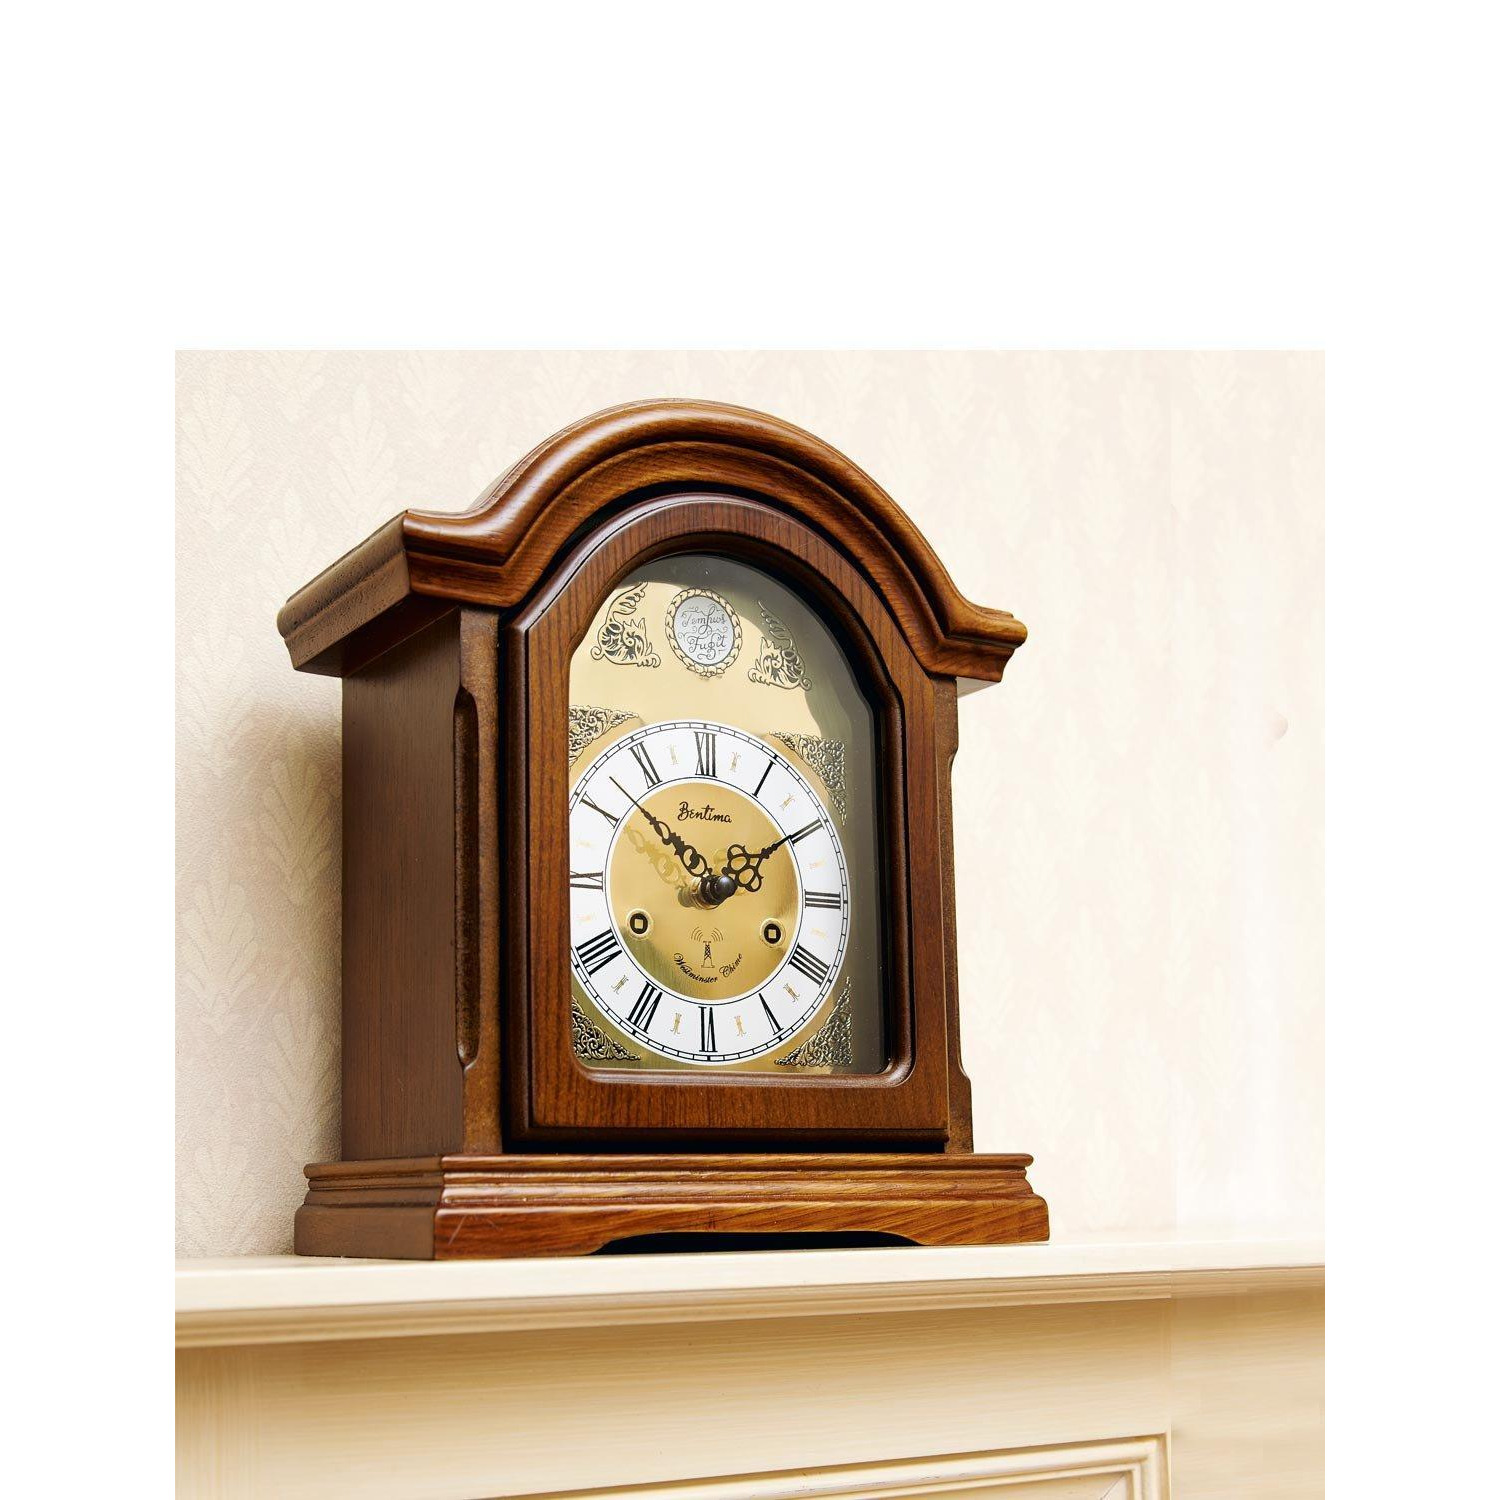 Radio Controlled Westminster Chime Arch Mantle Clock - image 1